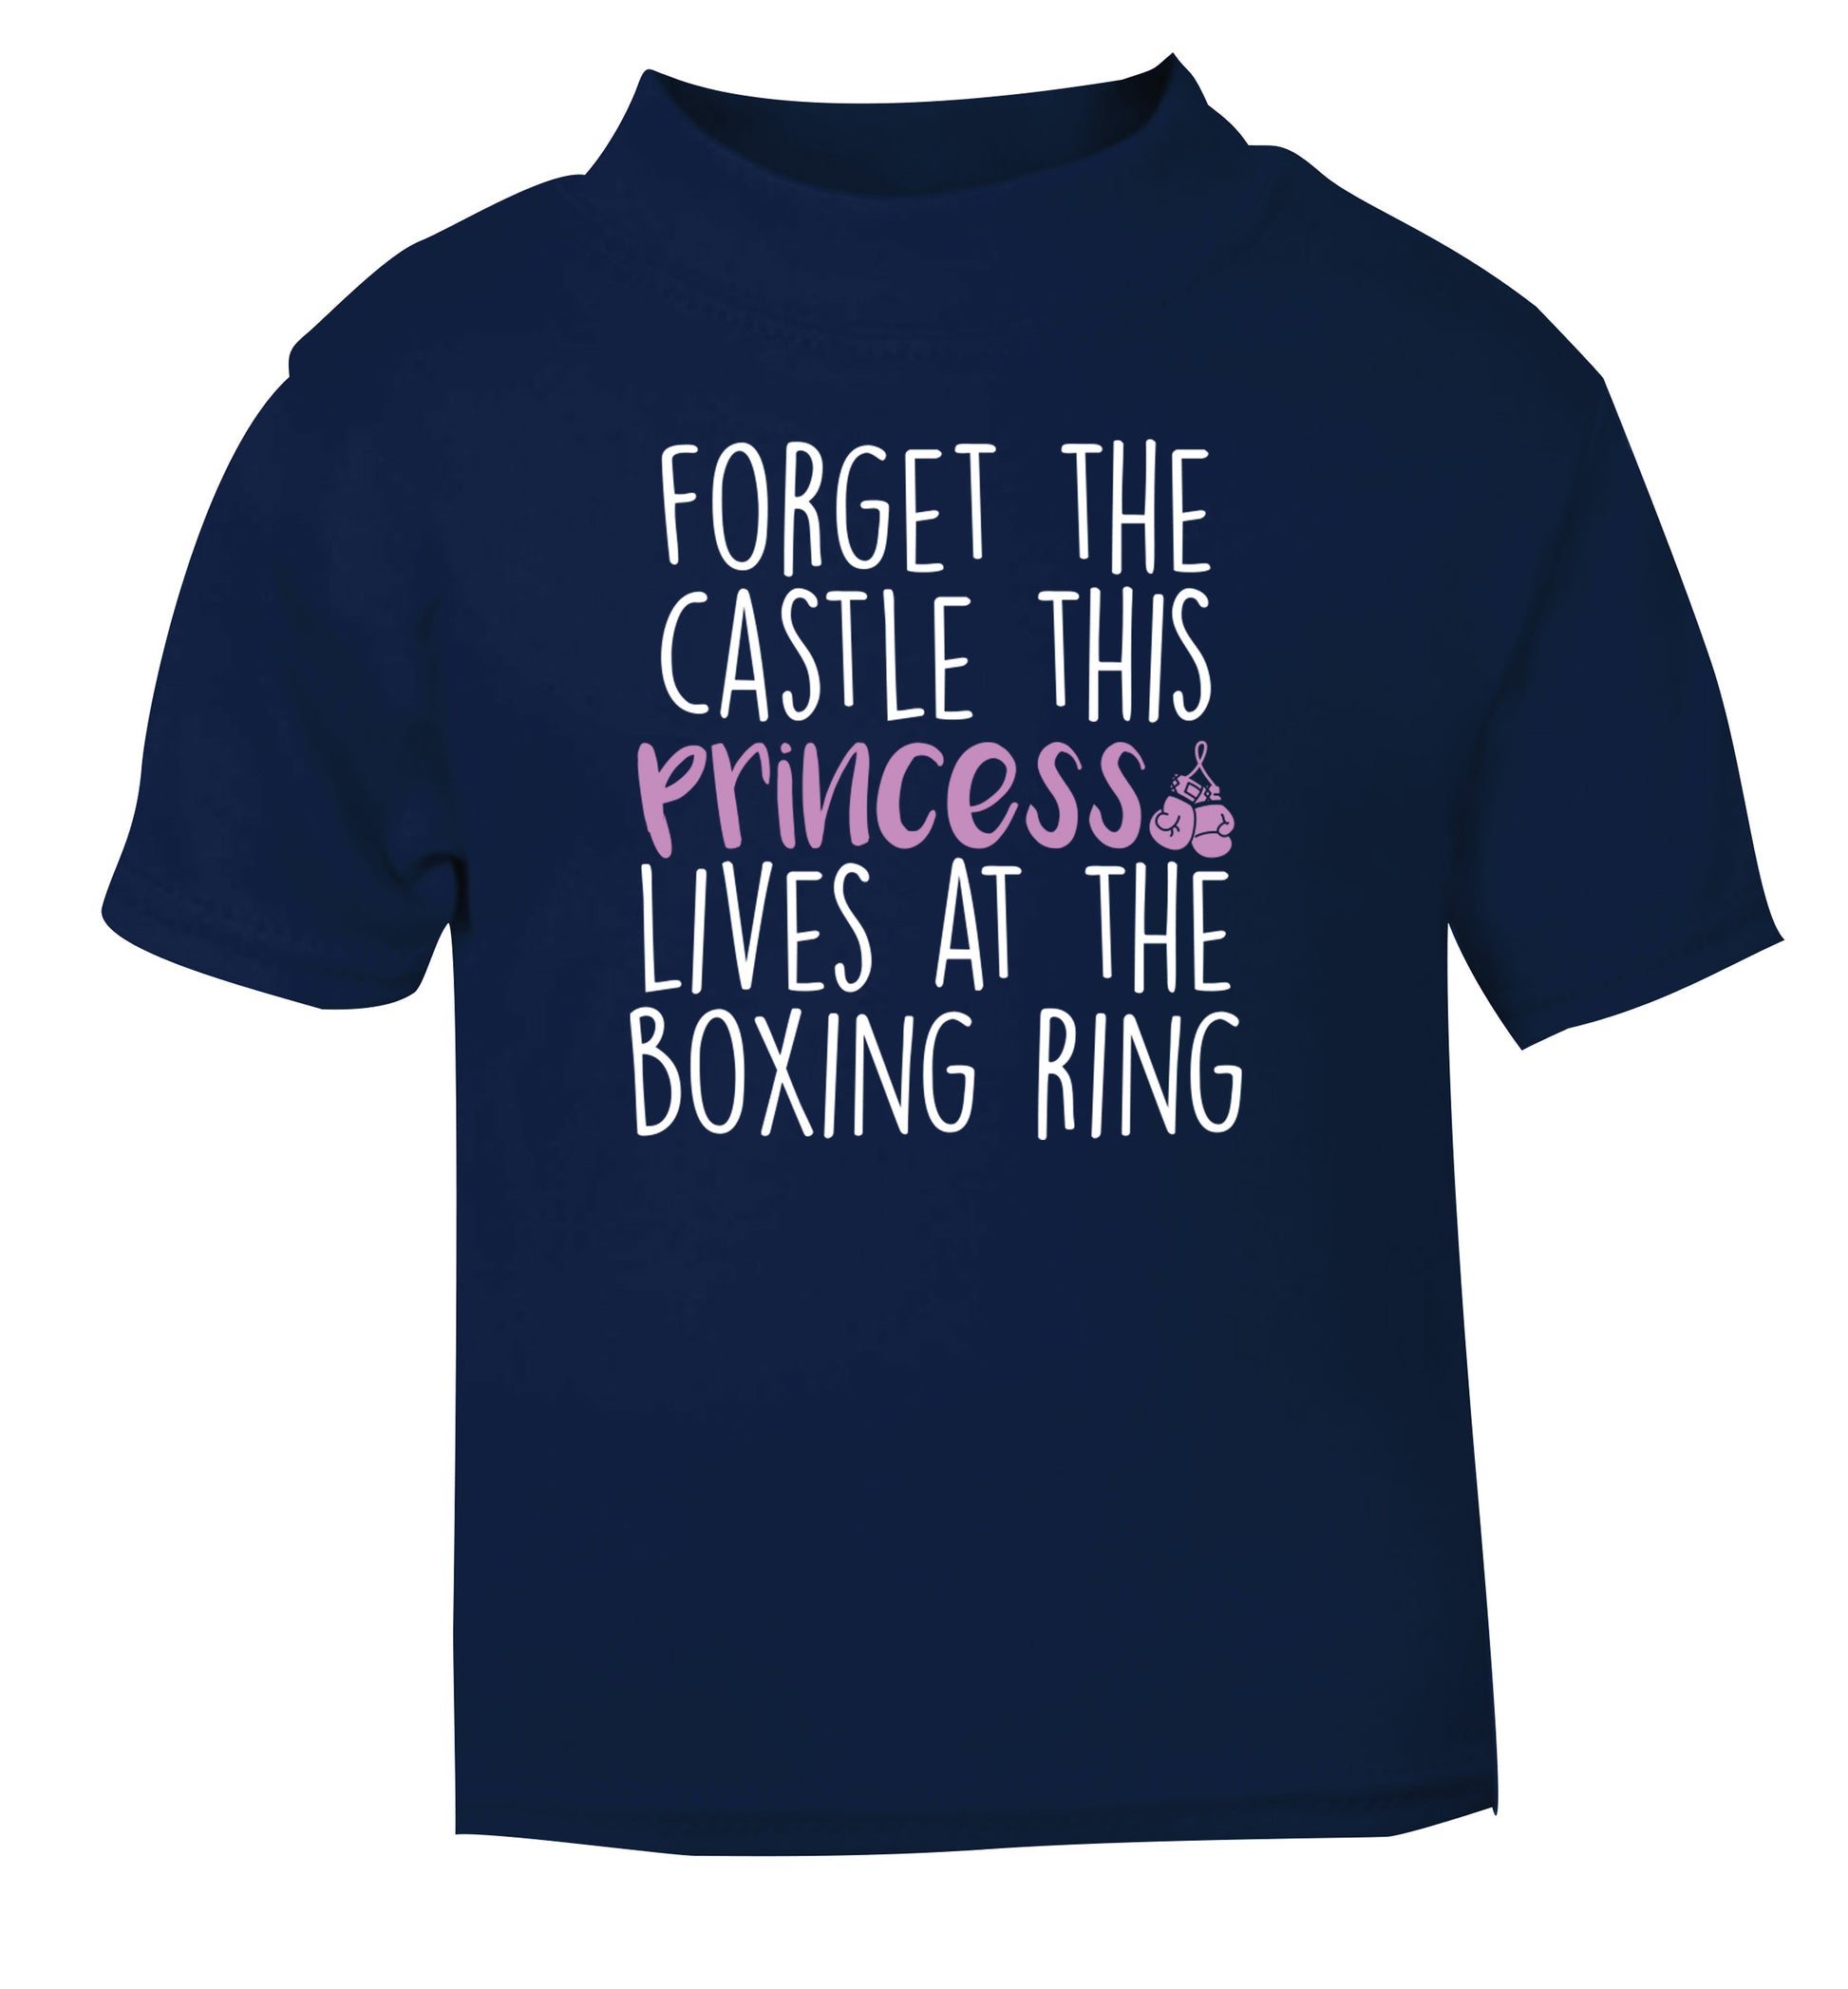 Forget the castle this princess lives at the boxing ring navy Baby Toddler Tshirt 2 Years